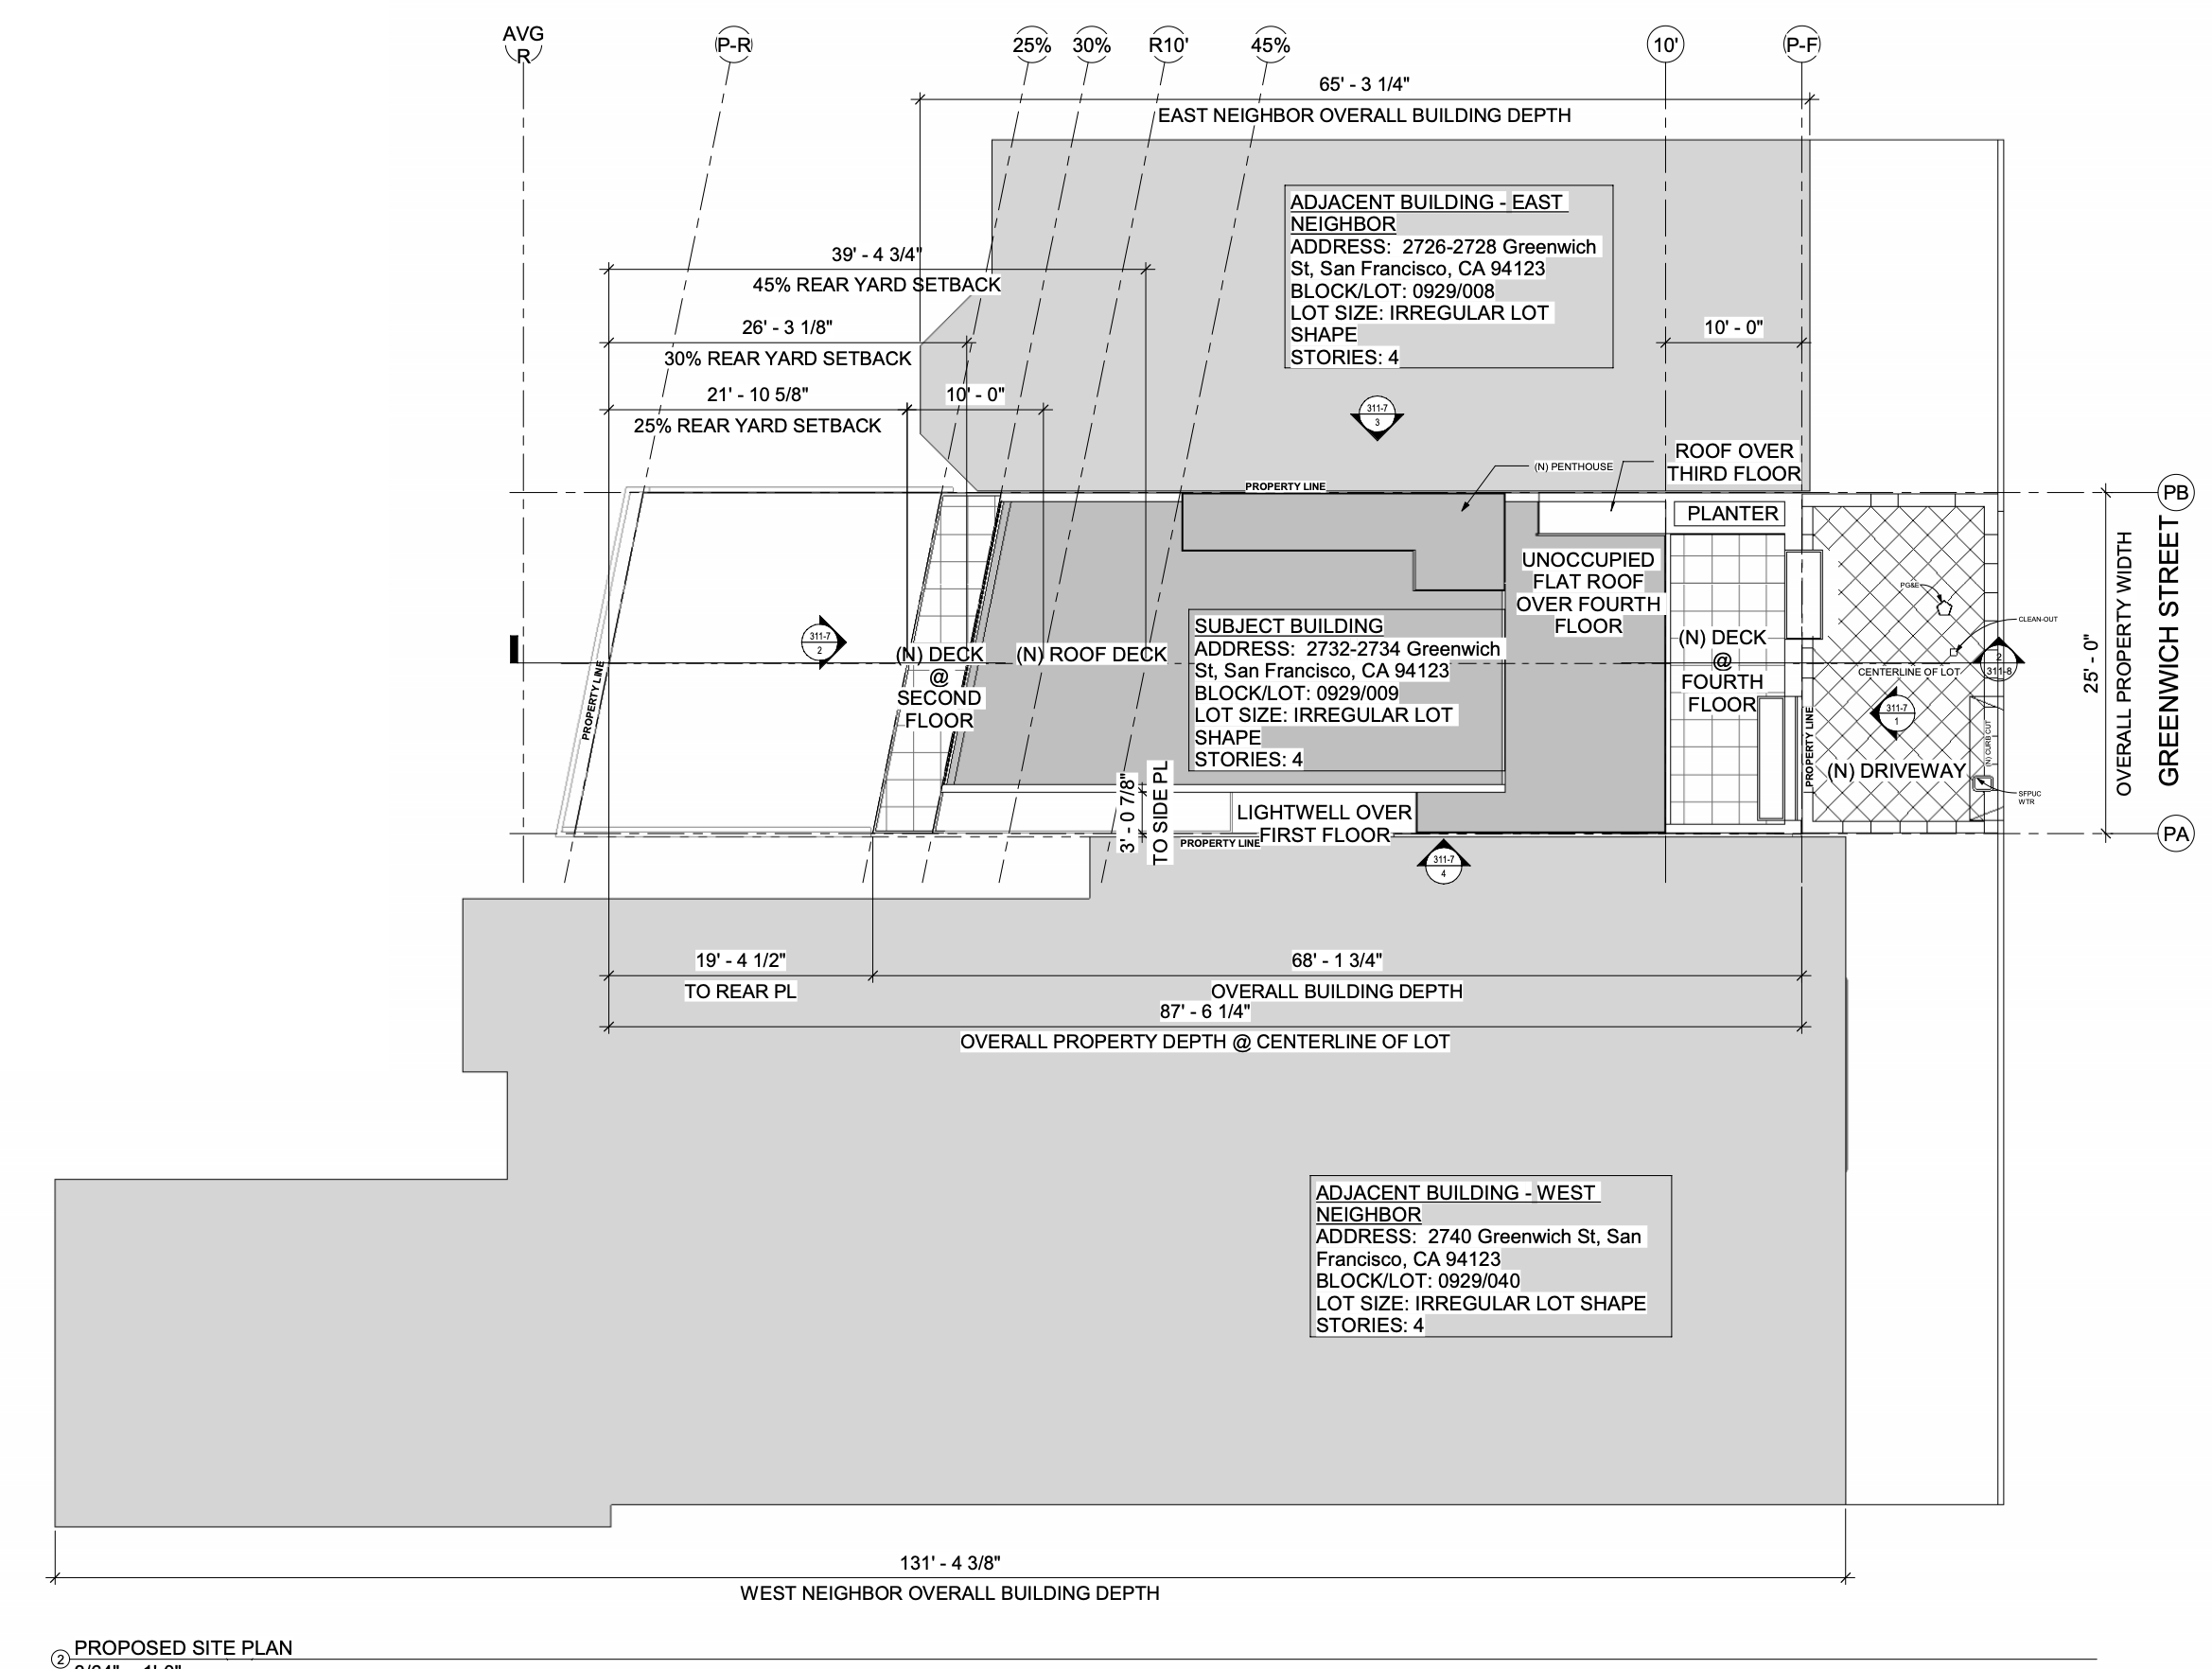 2732 Greenwich Street Proposed Site Plan